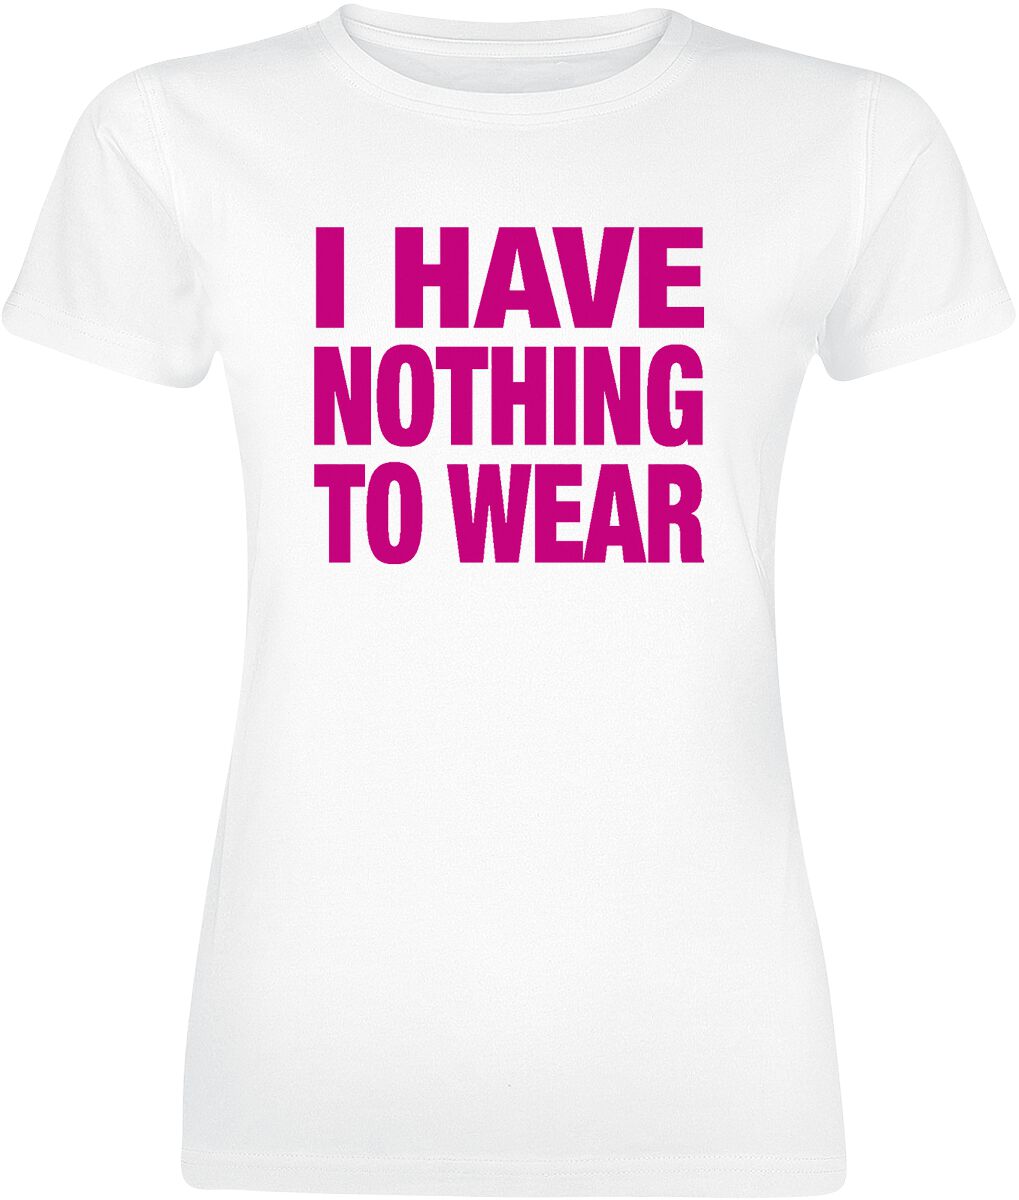 Slogans I Have Nothing To Wear T-Shirt white